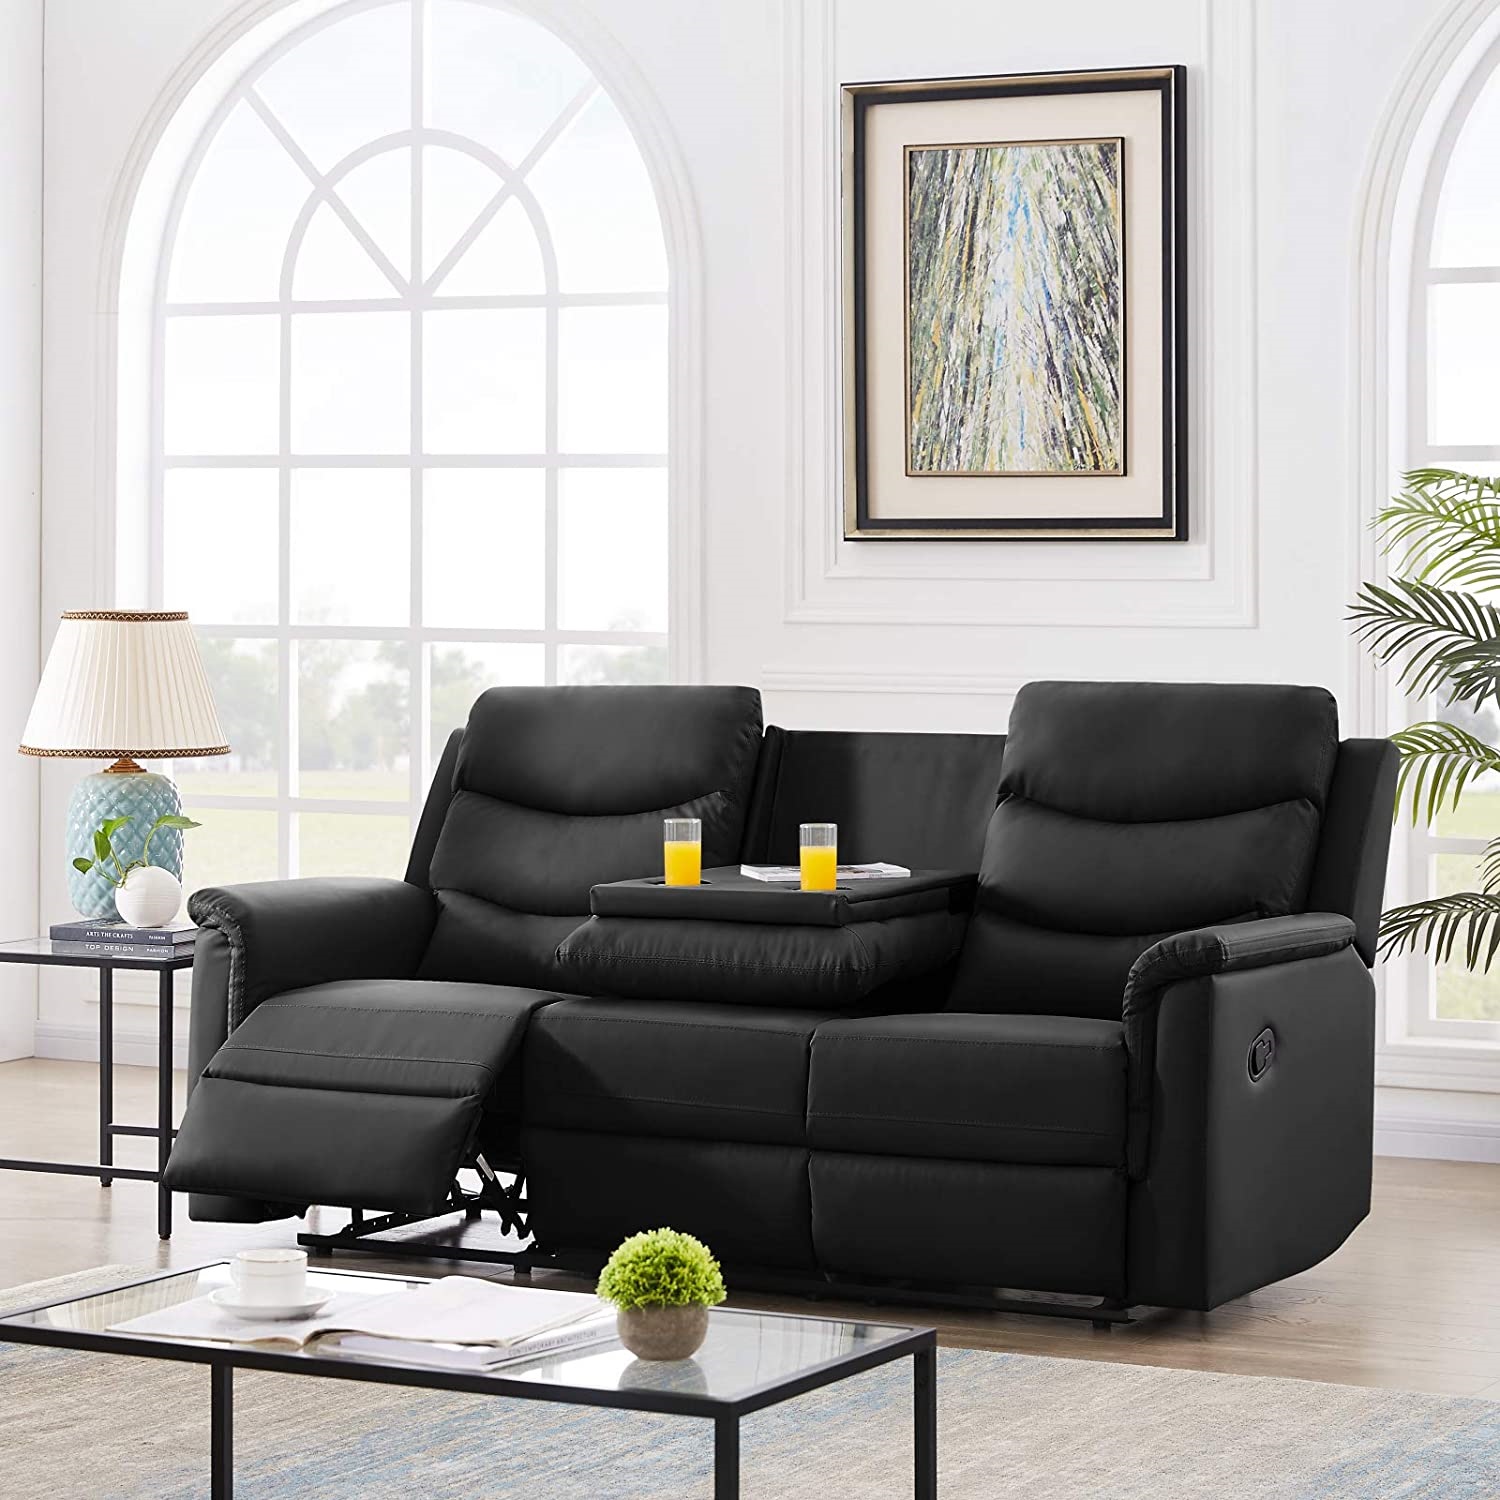 Pannow Double Recliner Loveseat with Console Slate, Double Reclining Sofa with Cup Holder